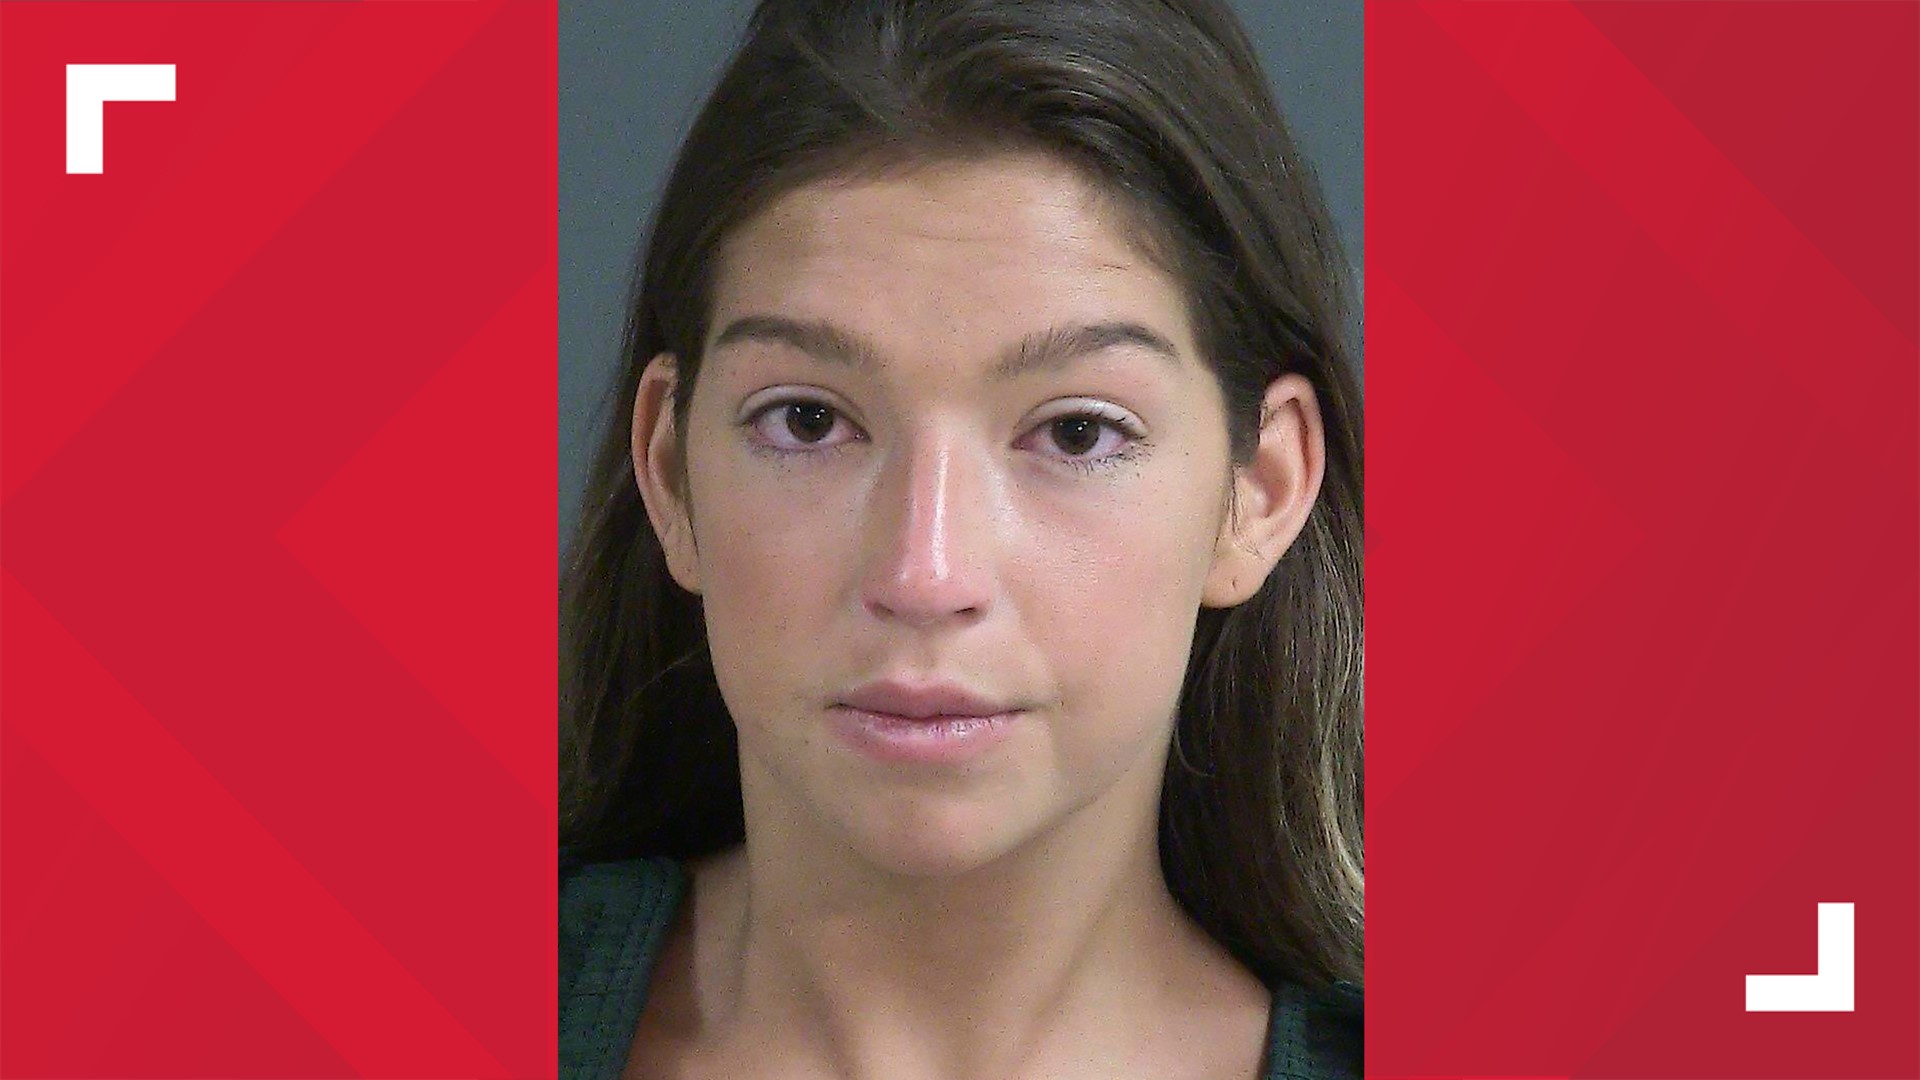 The woman accused of hitting and killing a bride just hours after her wedding in a DUI crash was given a $150,000 bond on Friday.